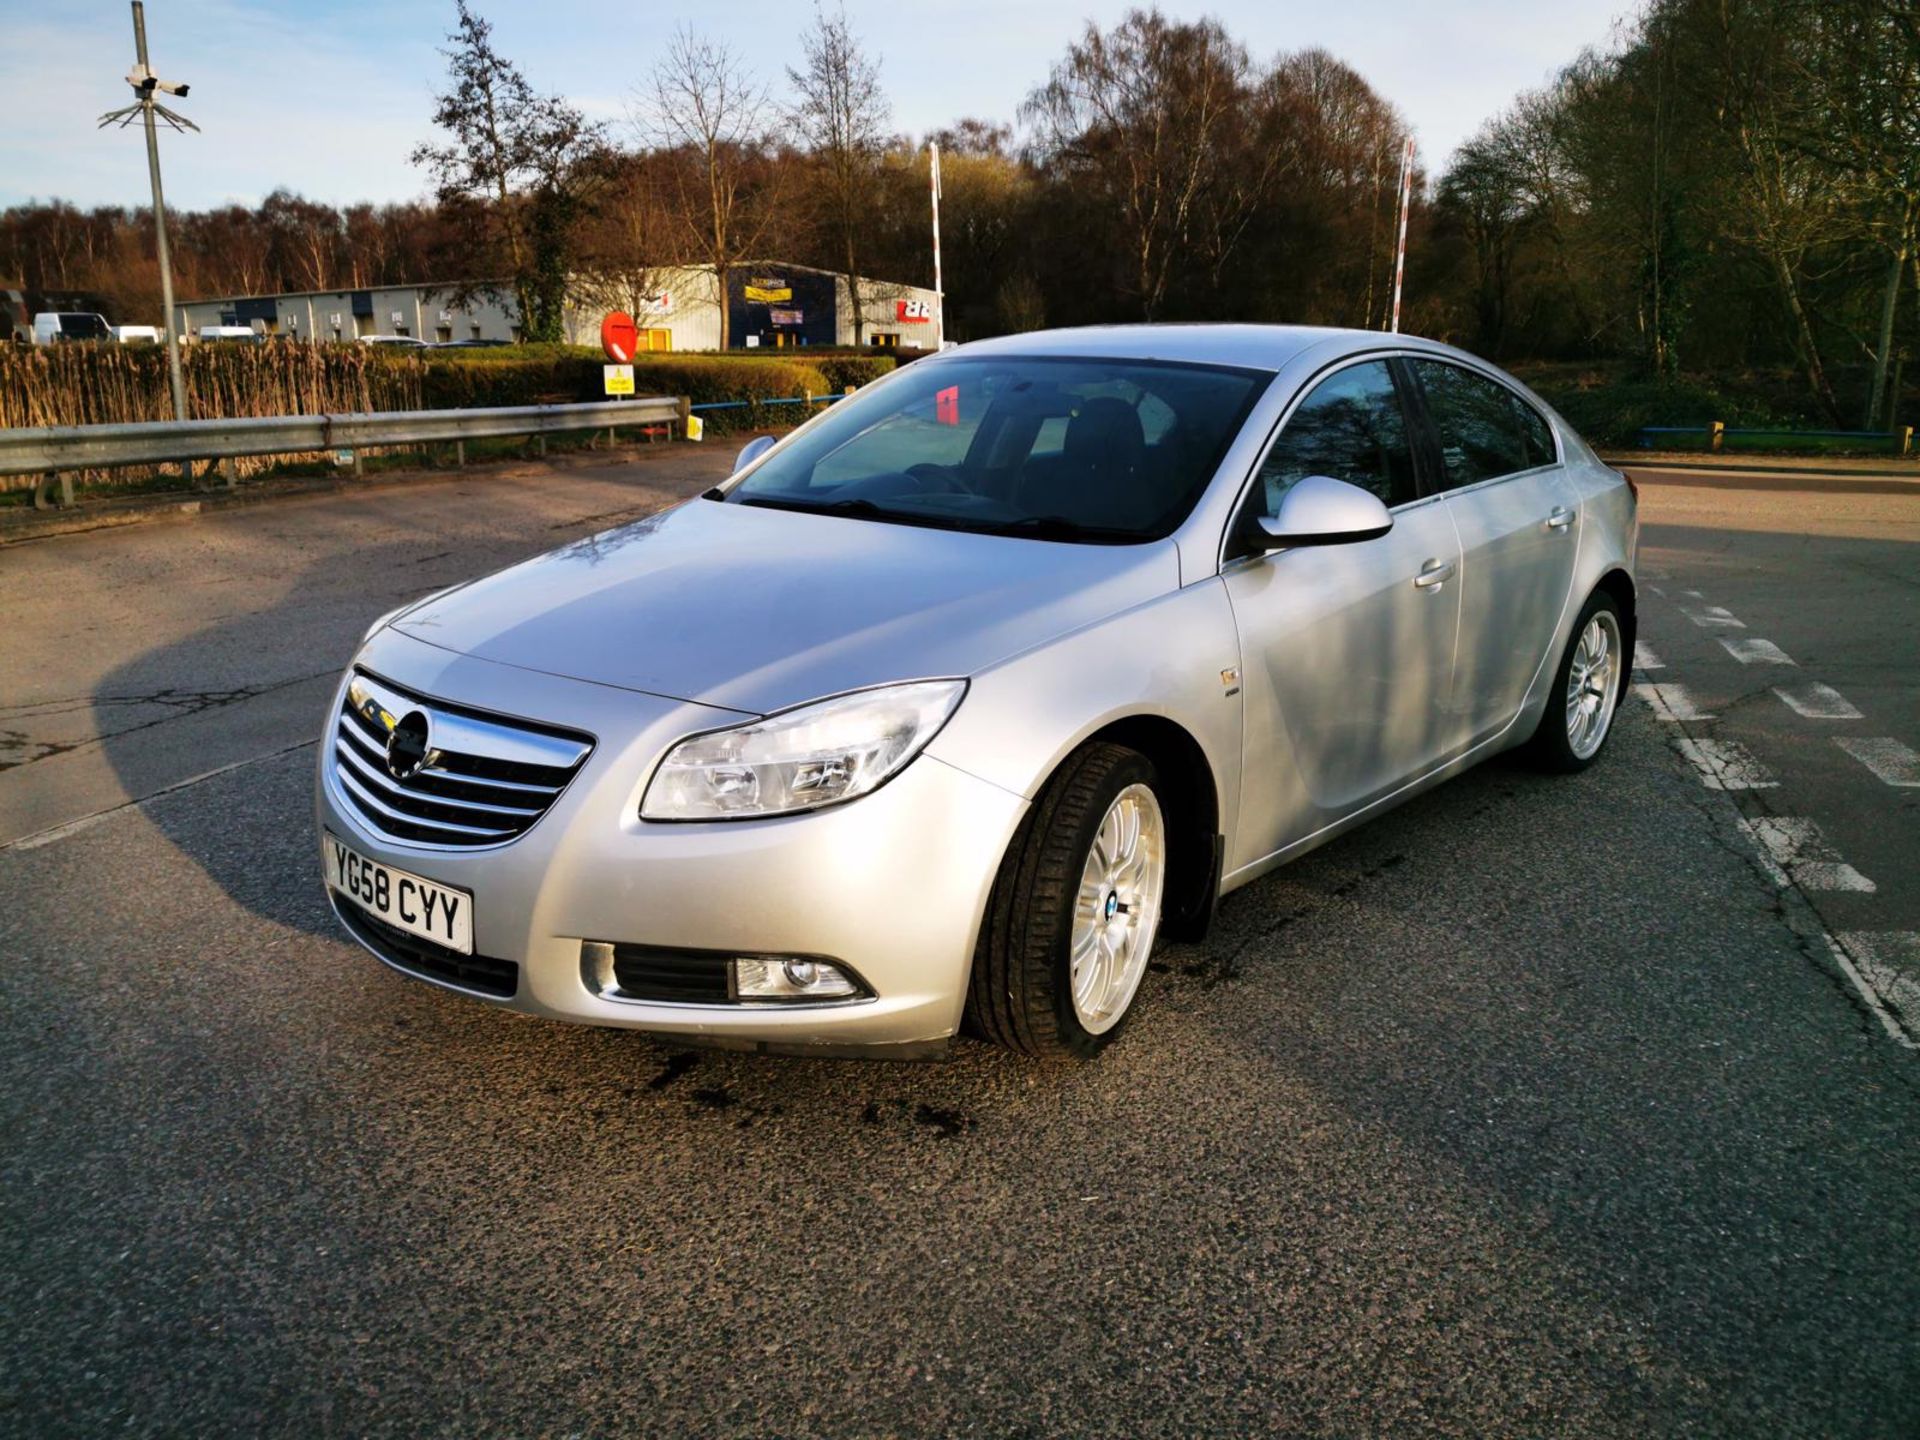 2009/58 REG VAUXHALL INSIGNIA SRI 160 CDTI 2.0 DIESEL 5DR HATCHBACK, SHOWING 3 FORMER KEEPERS - Image 4 of 22